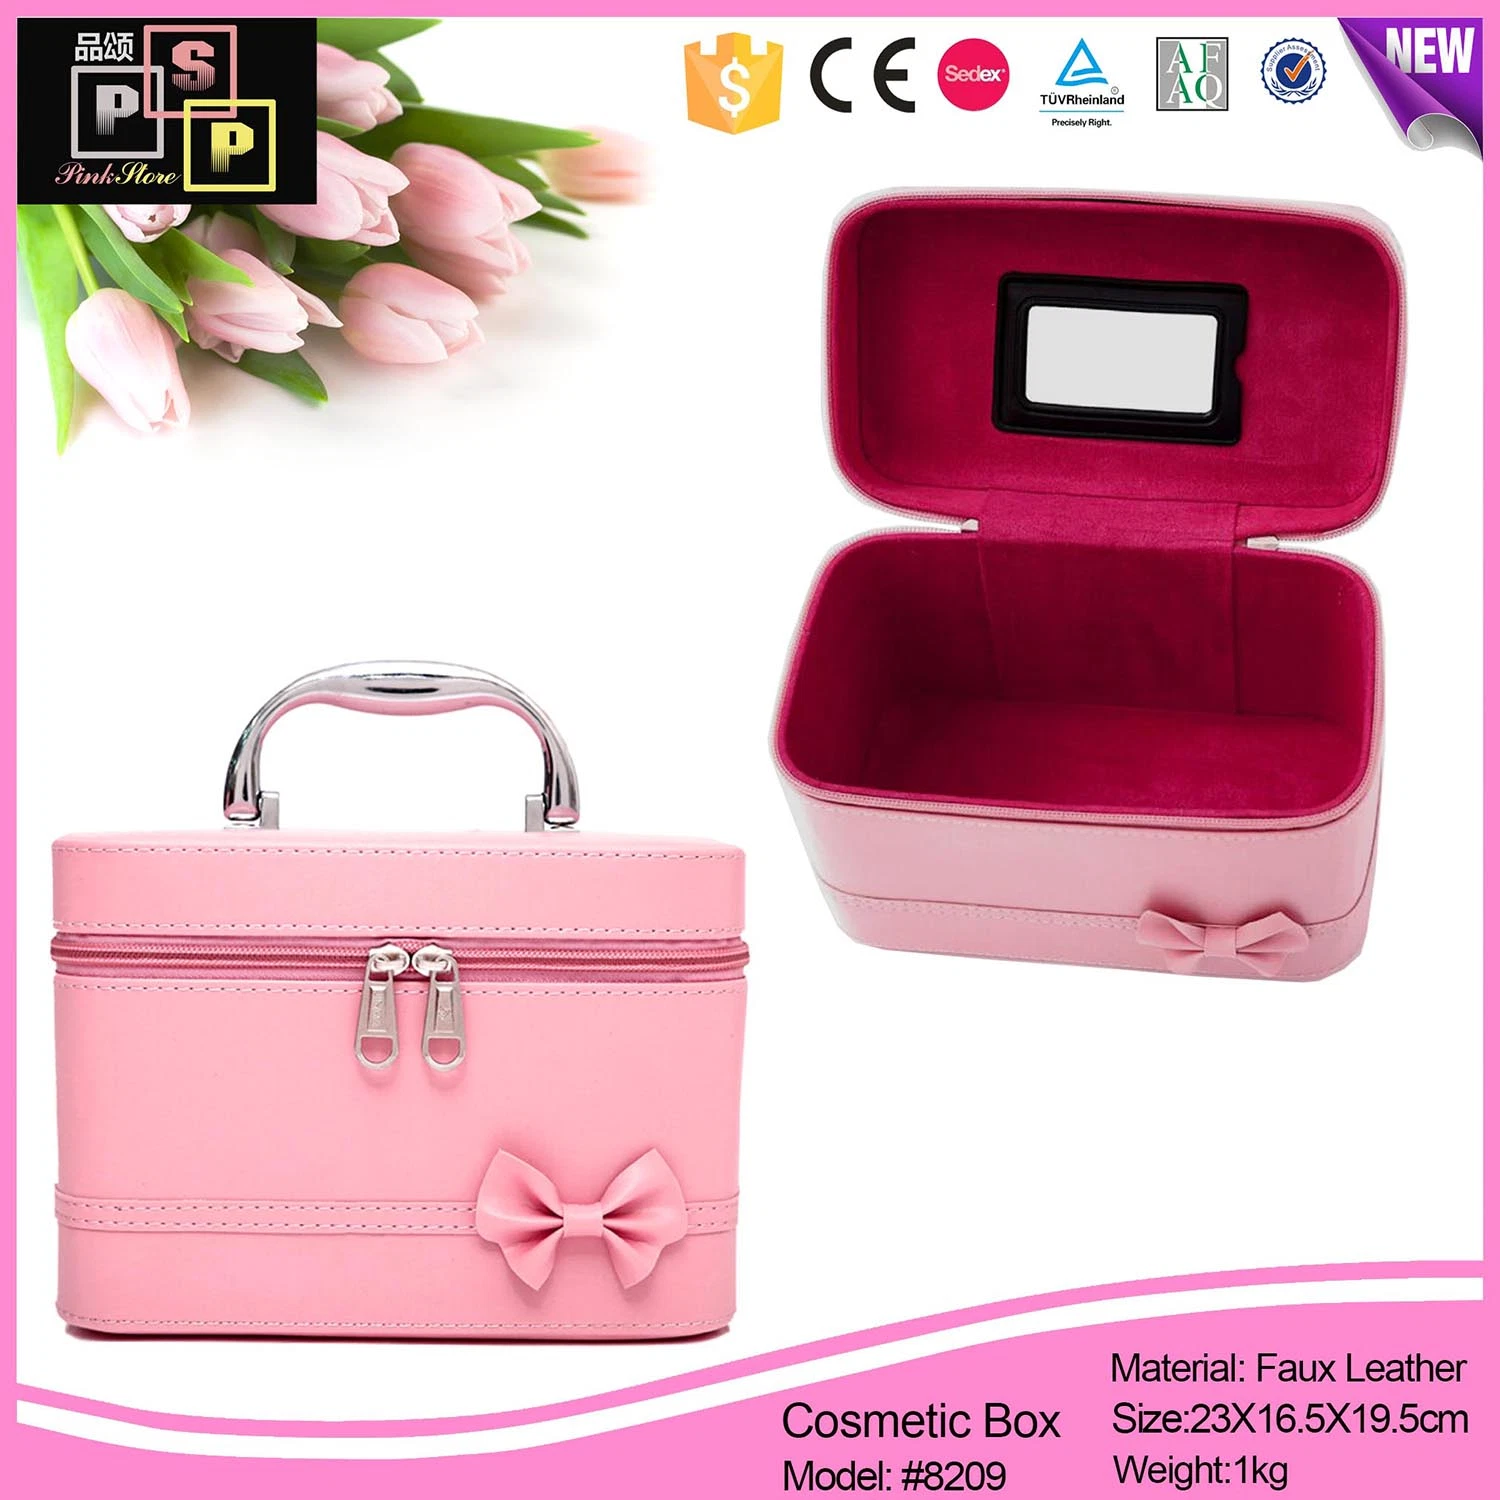 Luxury Pink Cosmetic Bags Cases Makeup Kit Travel Makeup Train Case Box (8209)